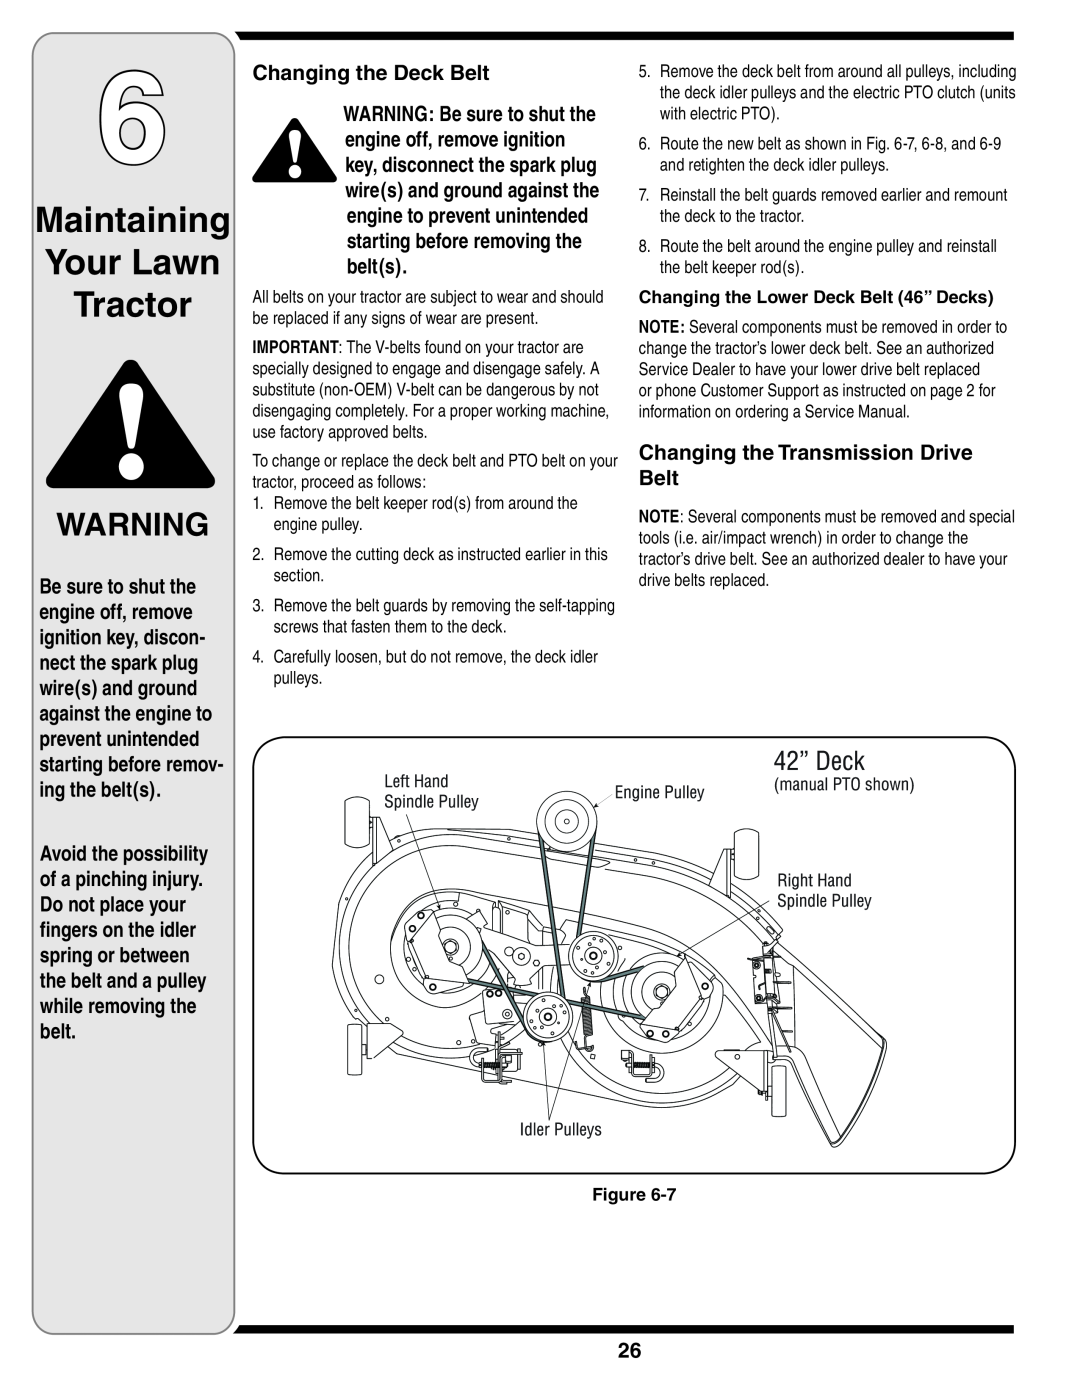 MTD 616 warranty Maintaining Your Lawn Tractor, Changing the Deck Belt, Changing the Transmission Drive Belt 